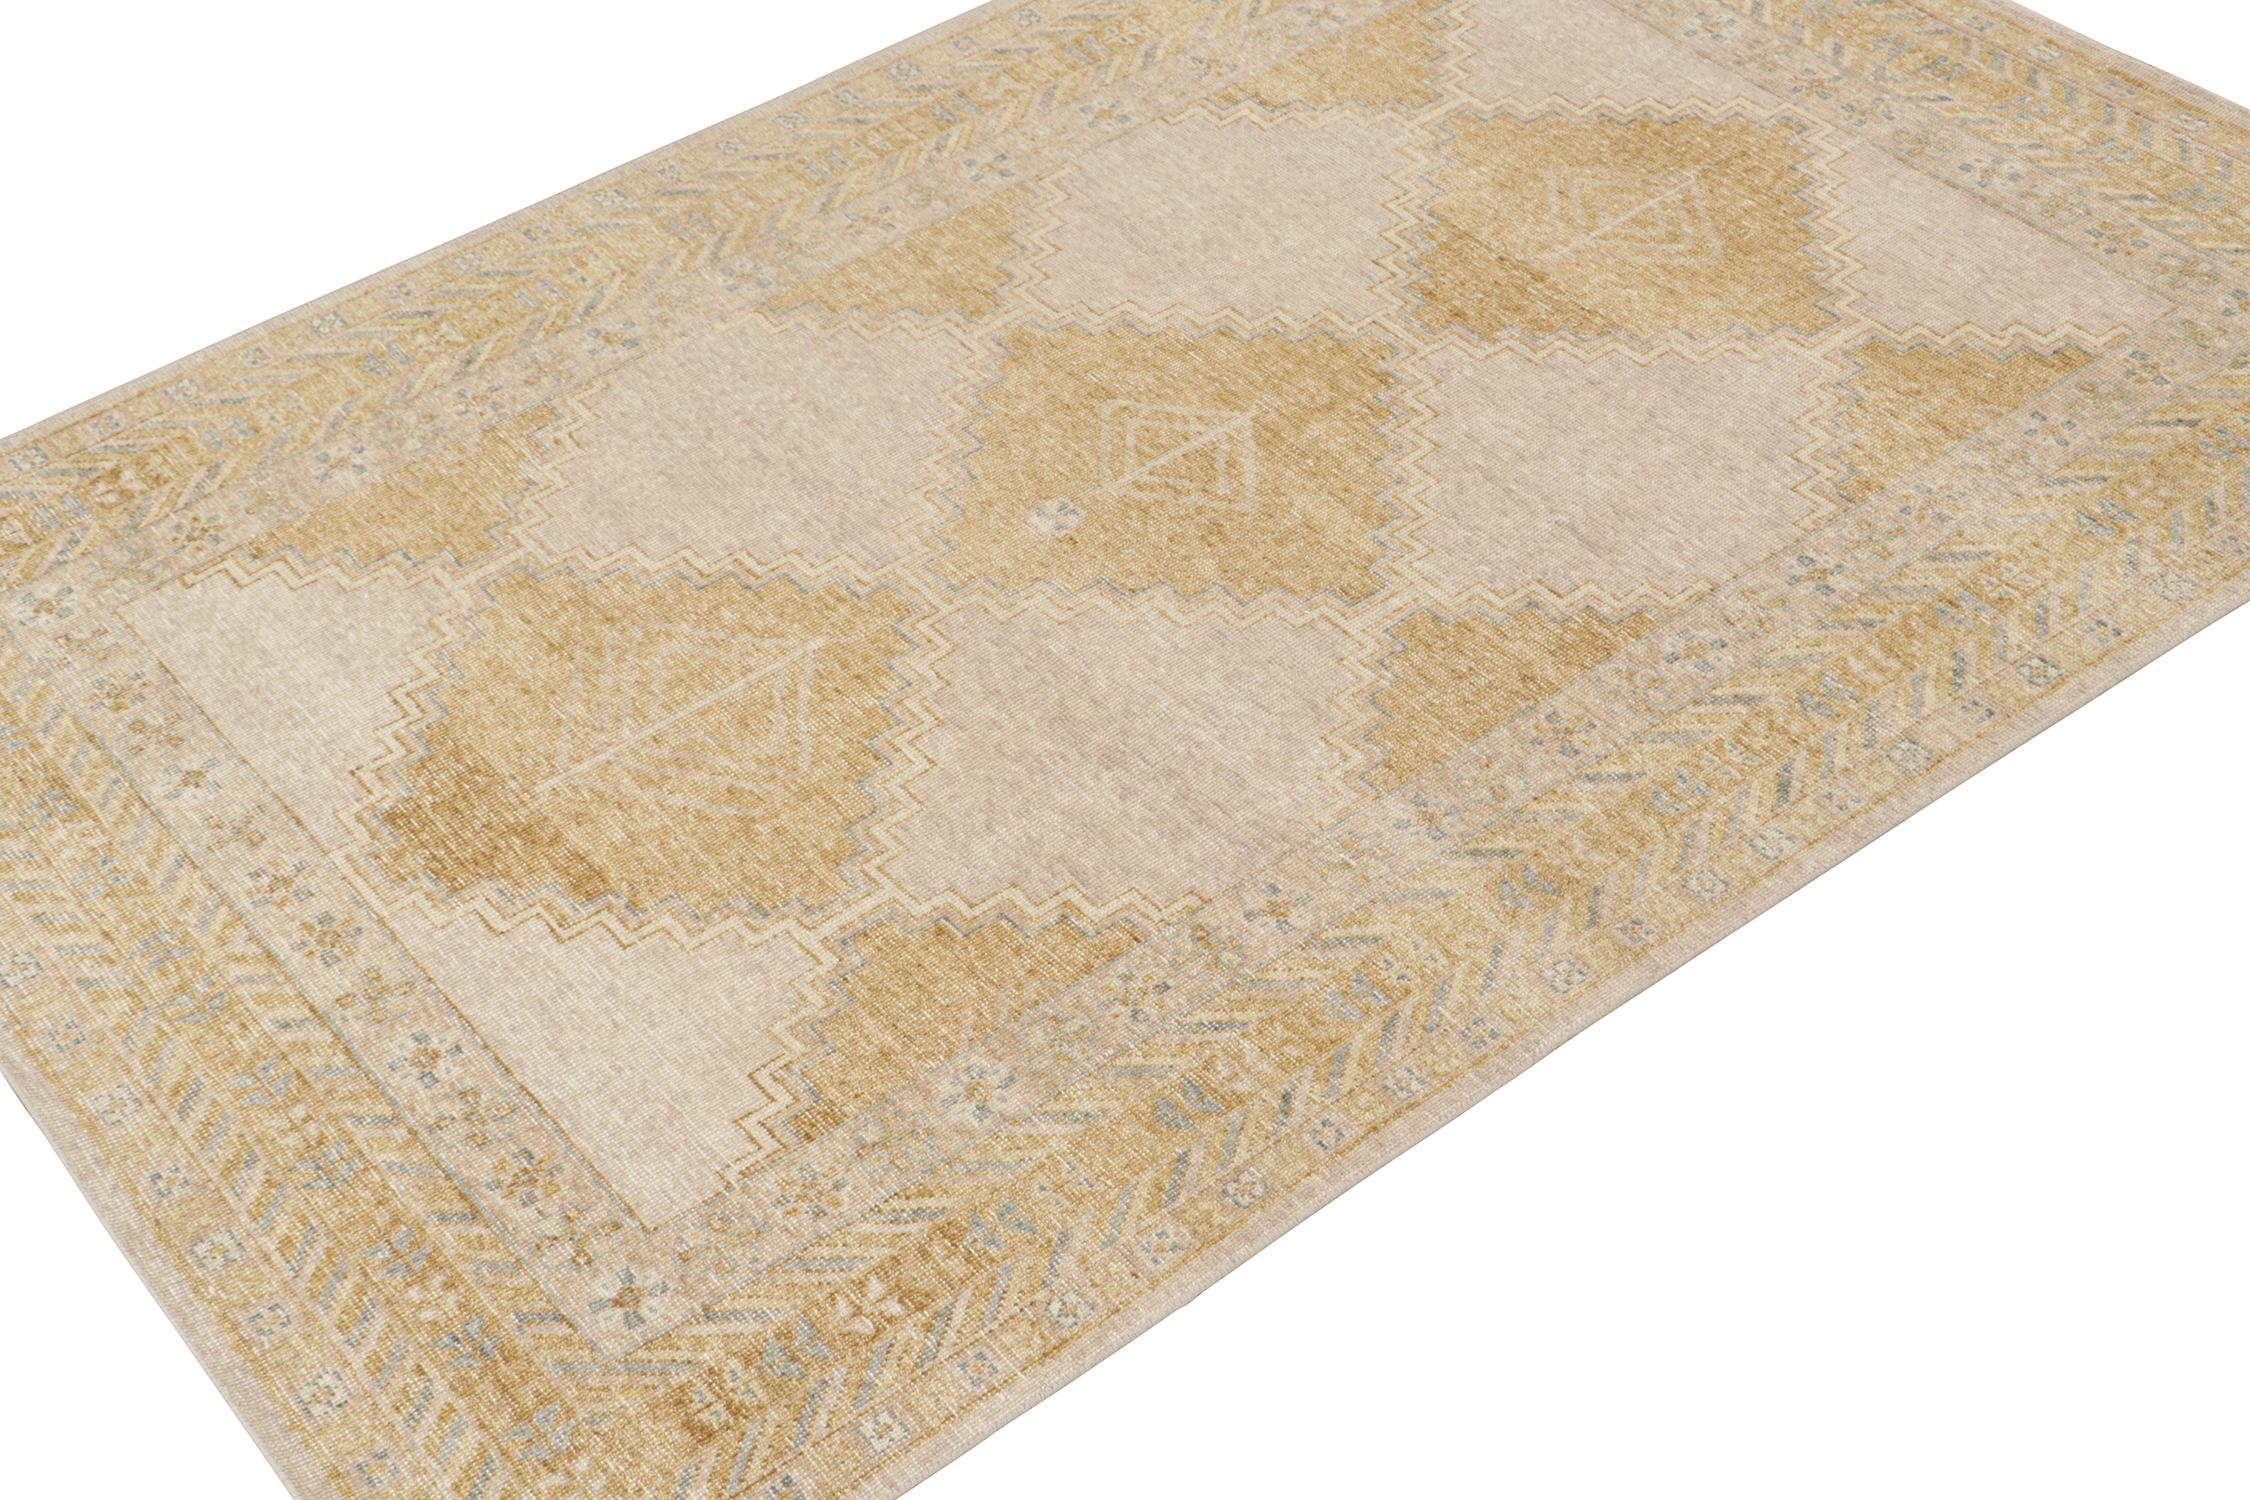 This 6x9 rug is a new addition to Rug & Kilim’s Homage Collection. Hand-knotted in wool and cotton, it recaptures an antique tribal rug pattern in a new take on distressed texture.

On the Design:

One can’t help but admire the balance of warm